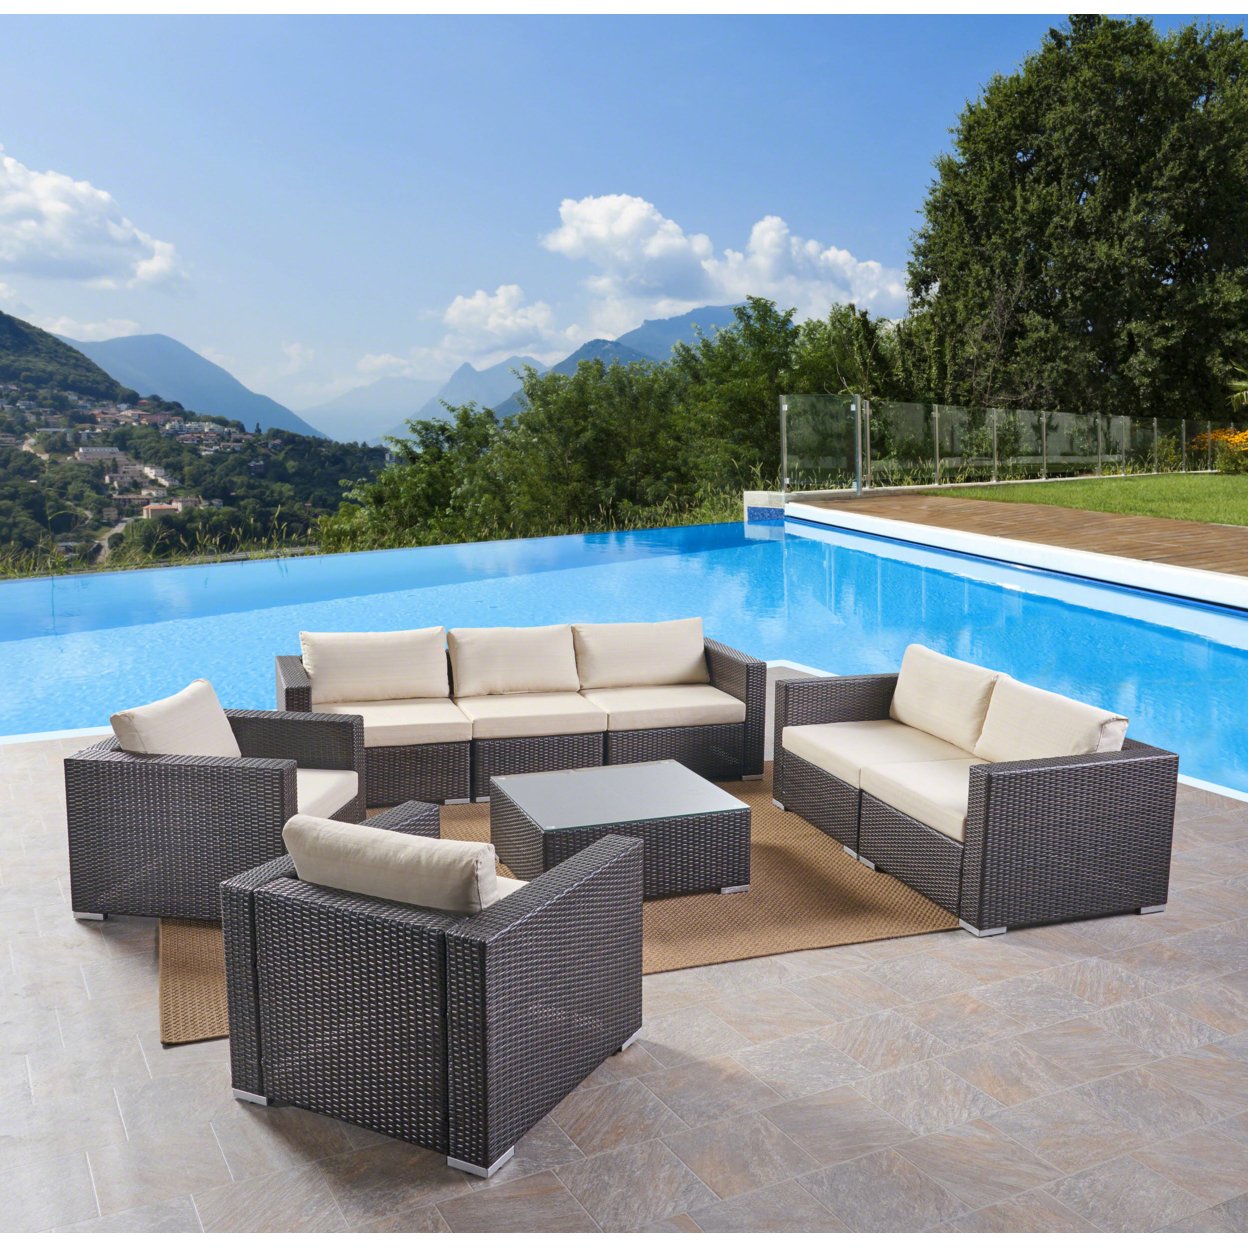 Samuel Outdoor 7 Seater Wicker Sofa Chat Set With Aluminum Frame And Cushions - Brown Wicker